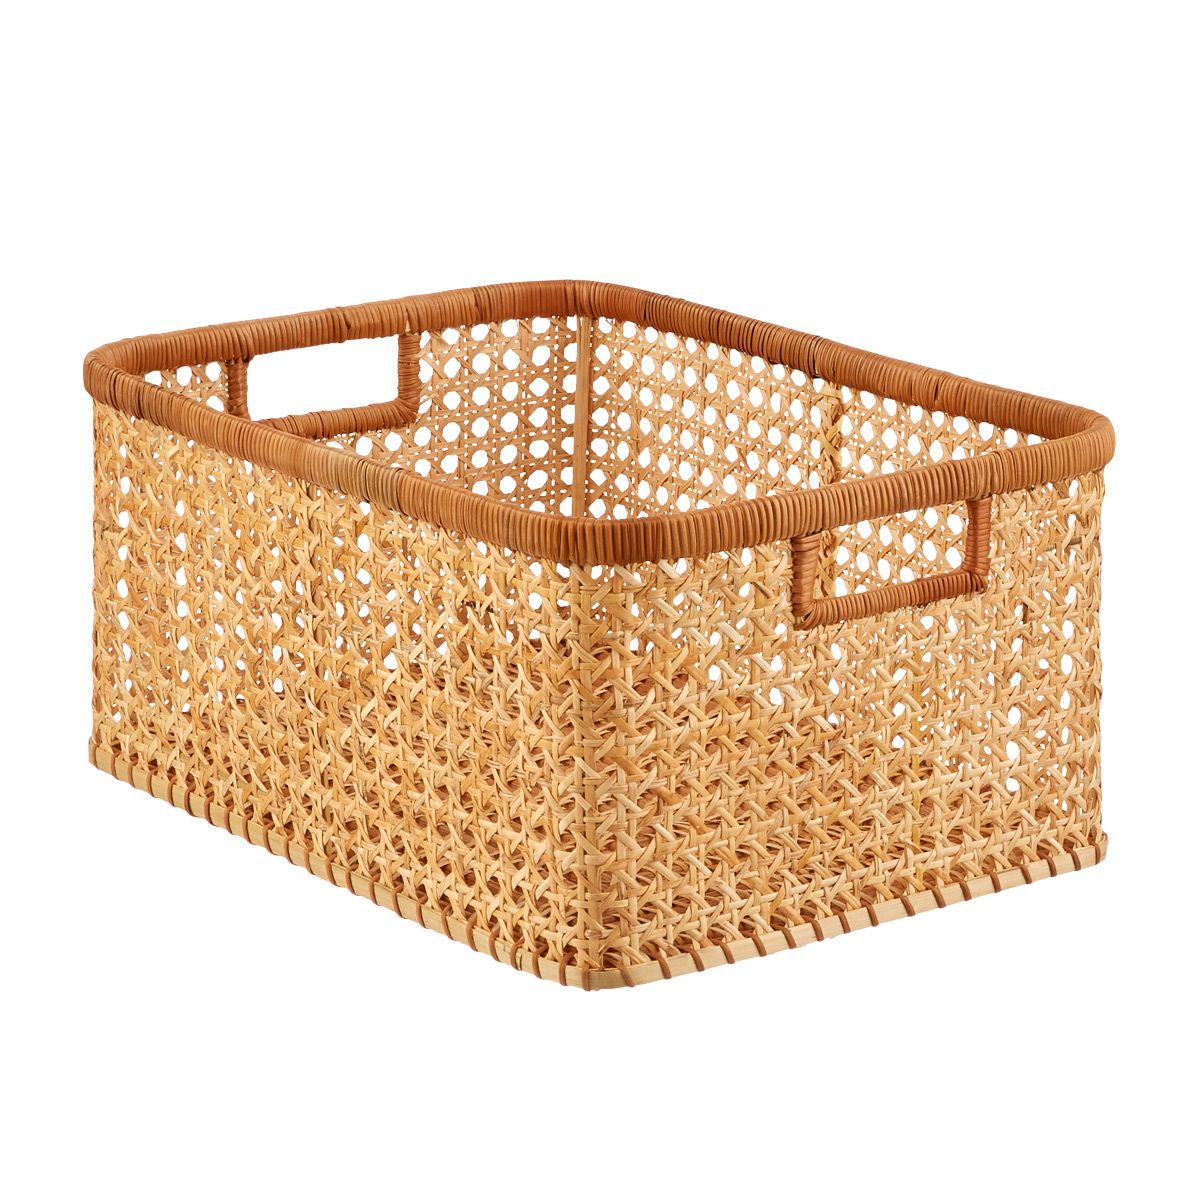 Albany Cane Rattan Bins | The Container Store